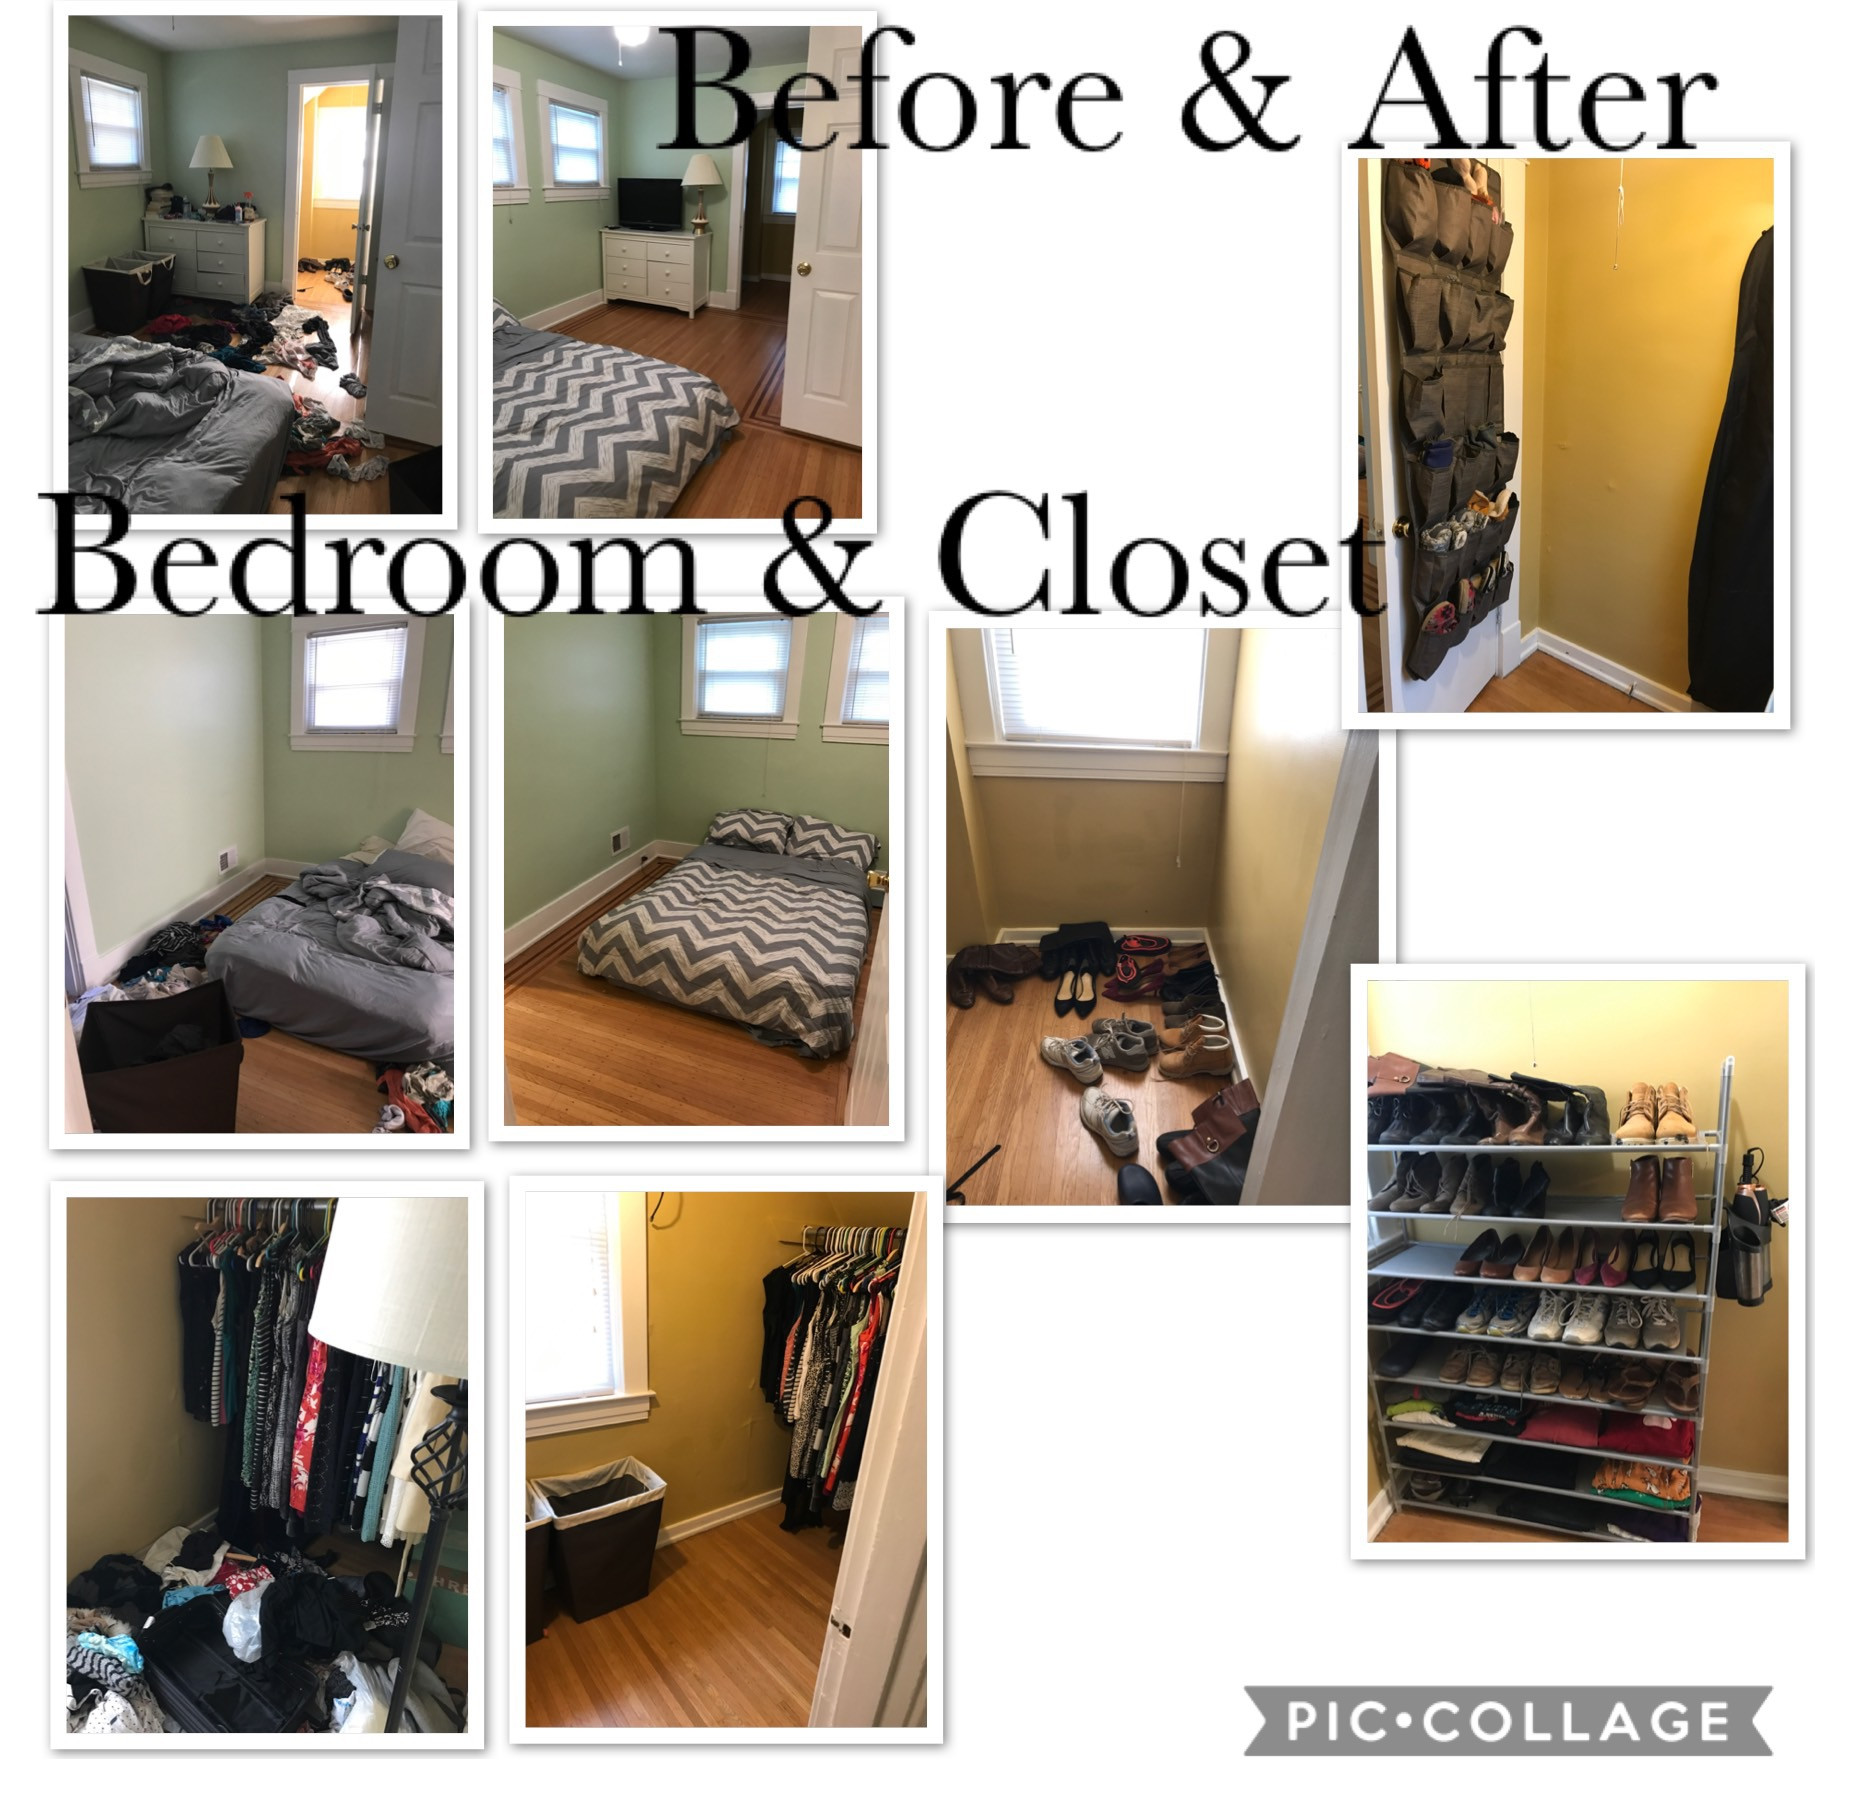 Bedroom and closet before and after